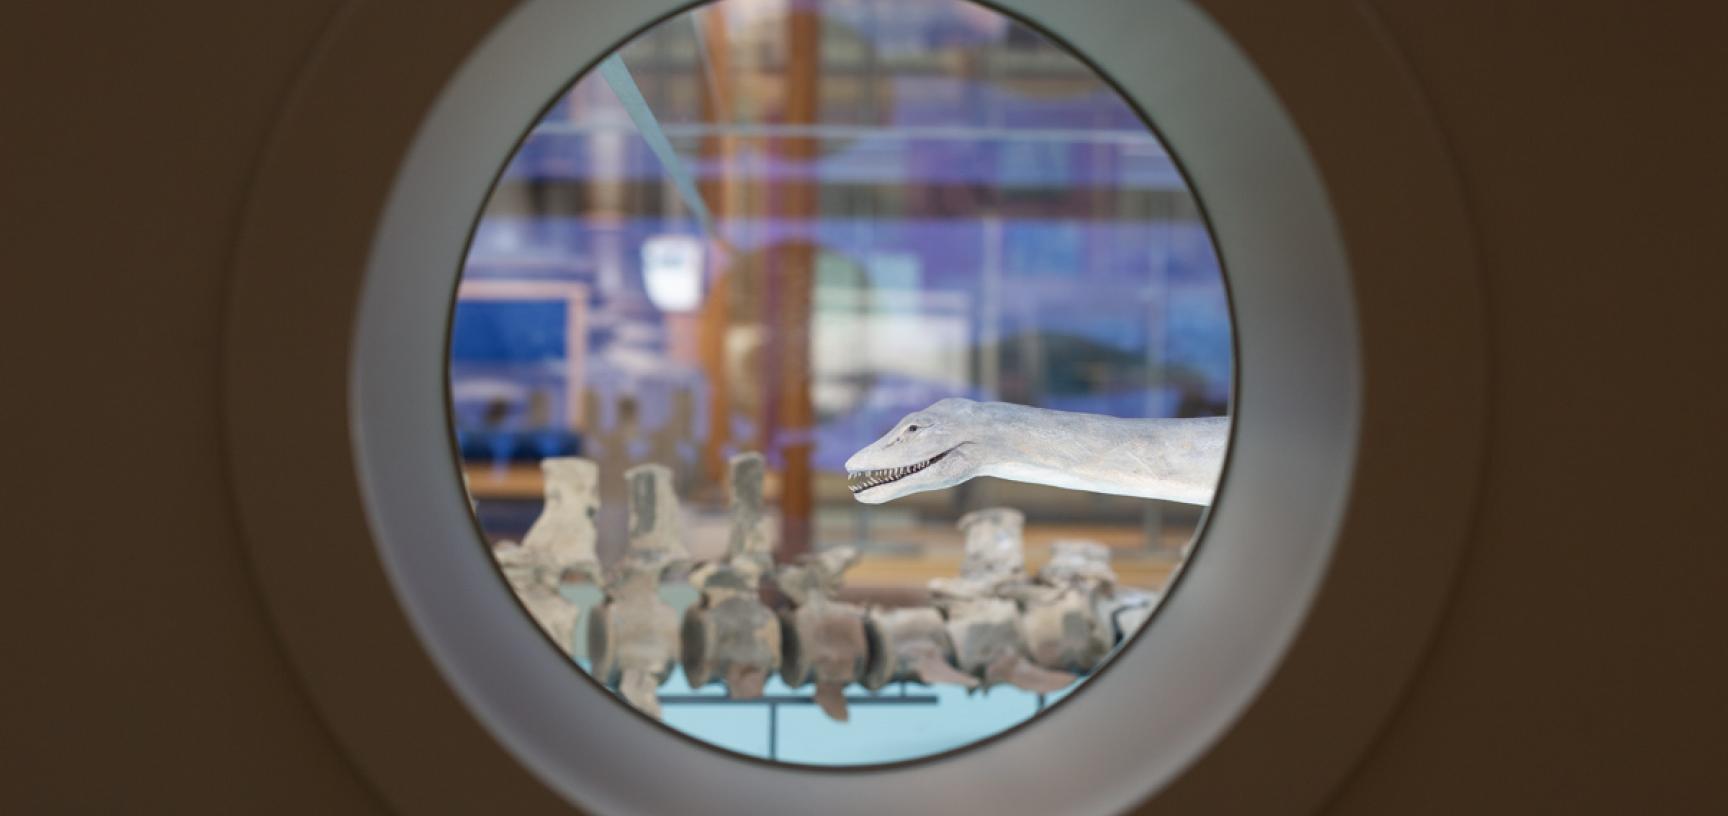 Portholes in the Out of the Deep display allow visitors to peer into the scale models and fossil skeletons